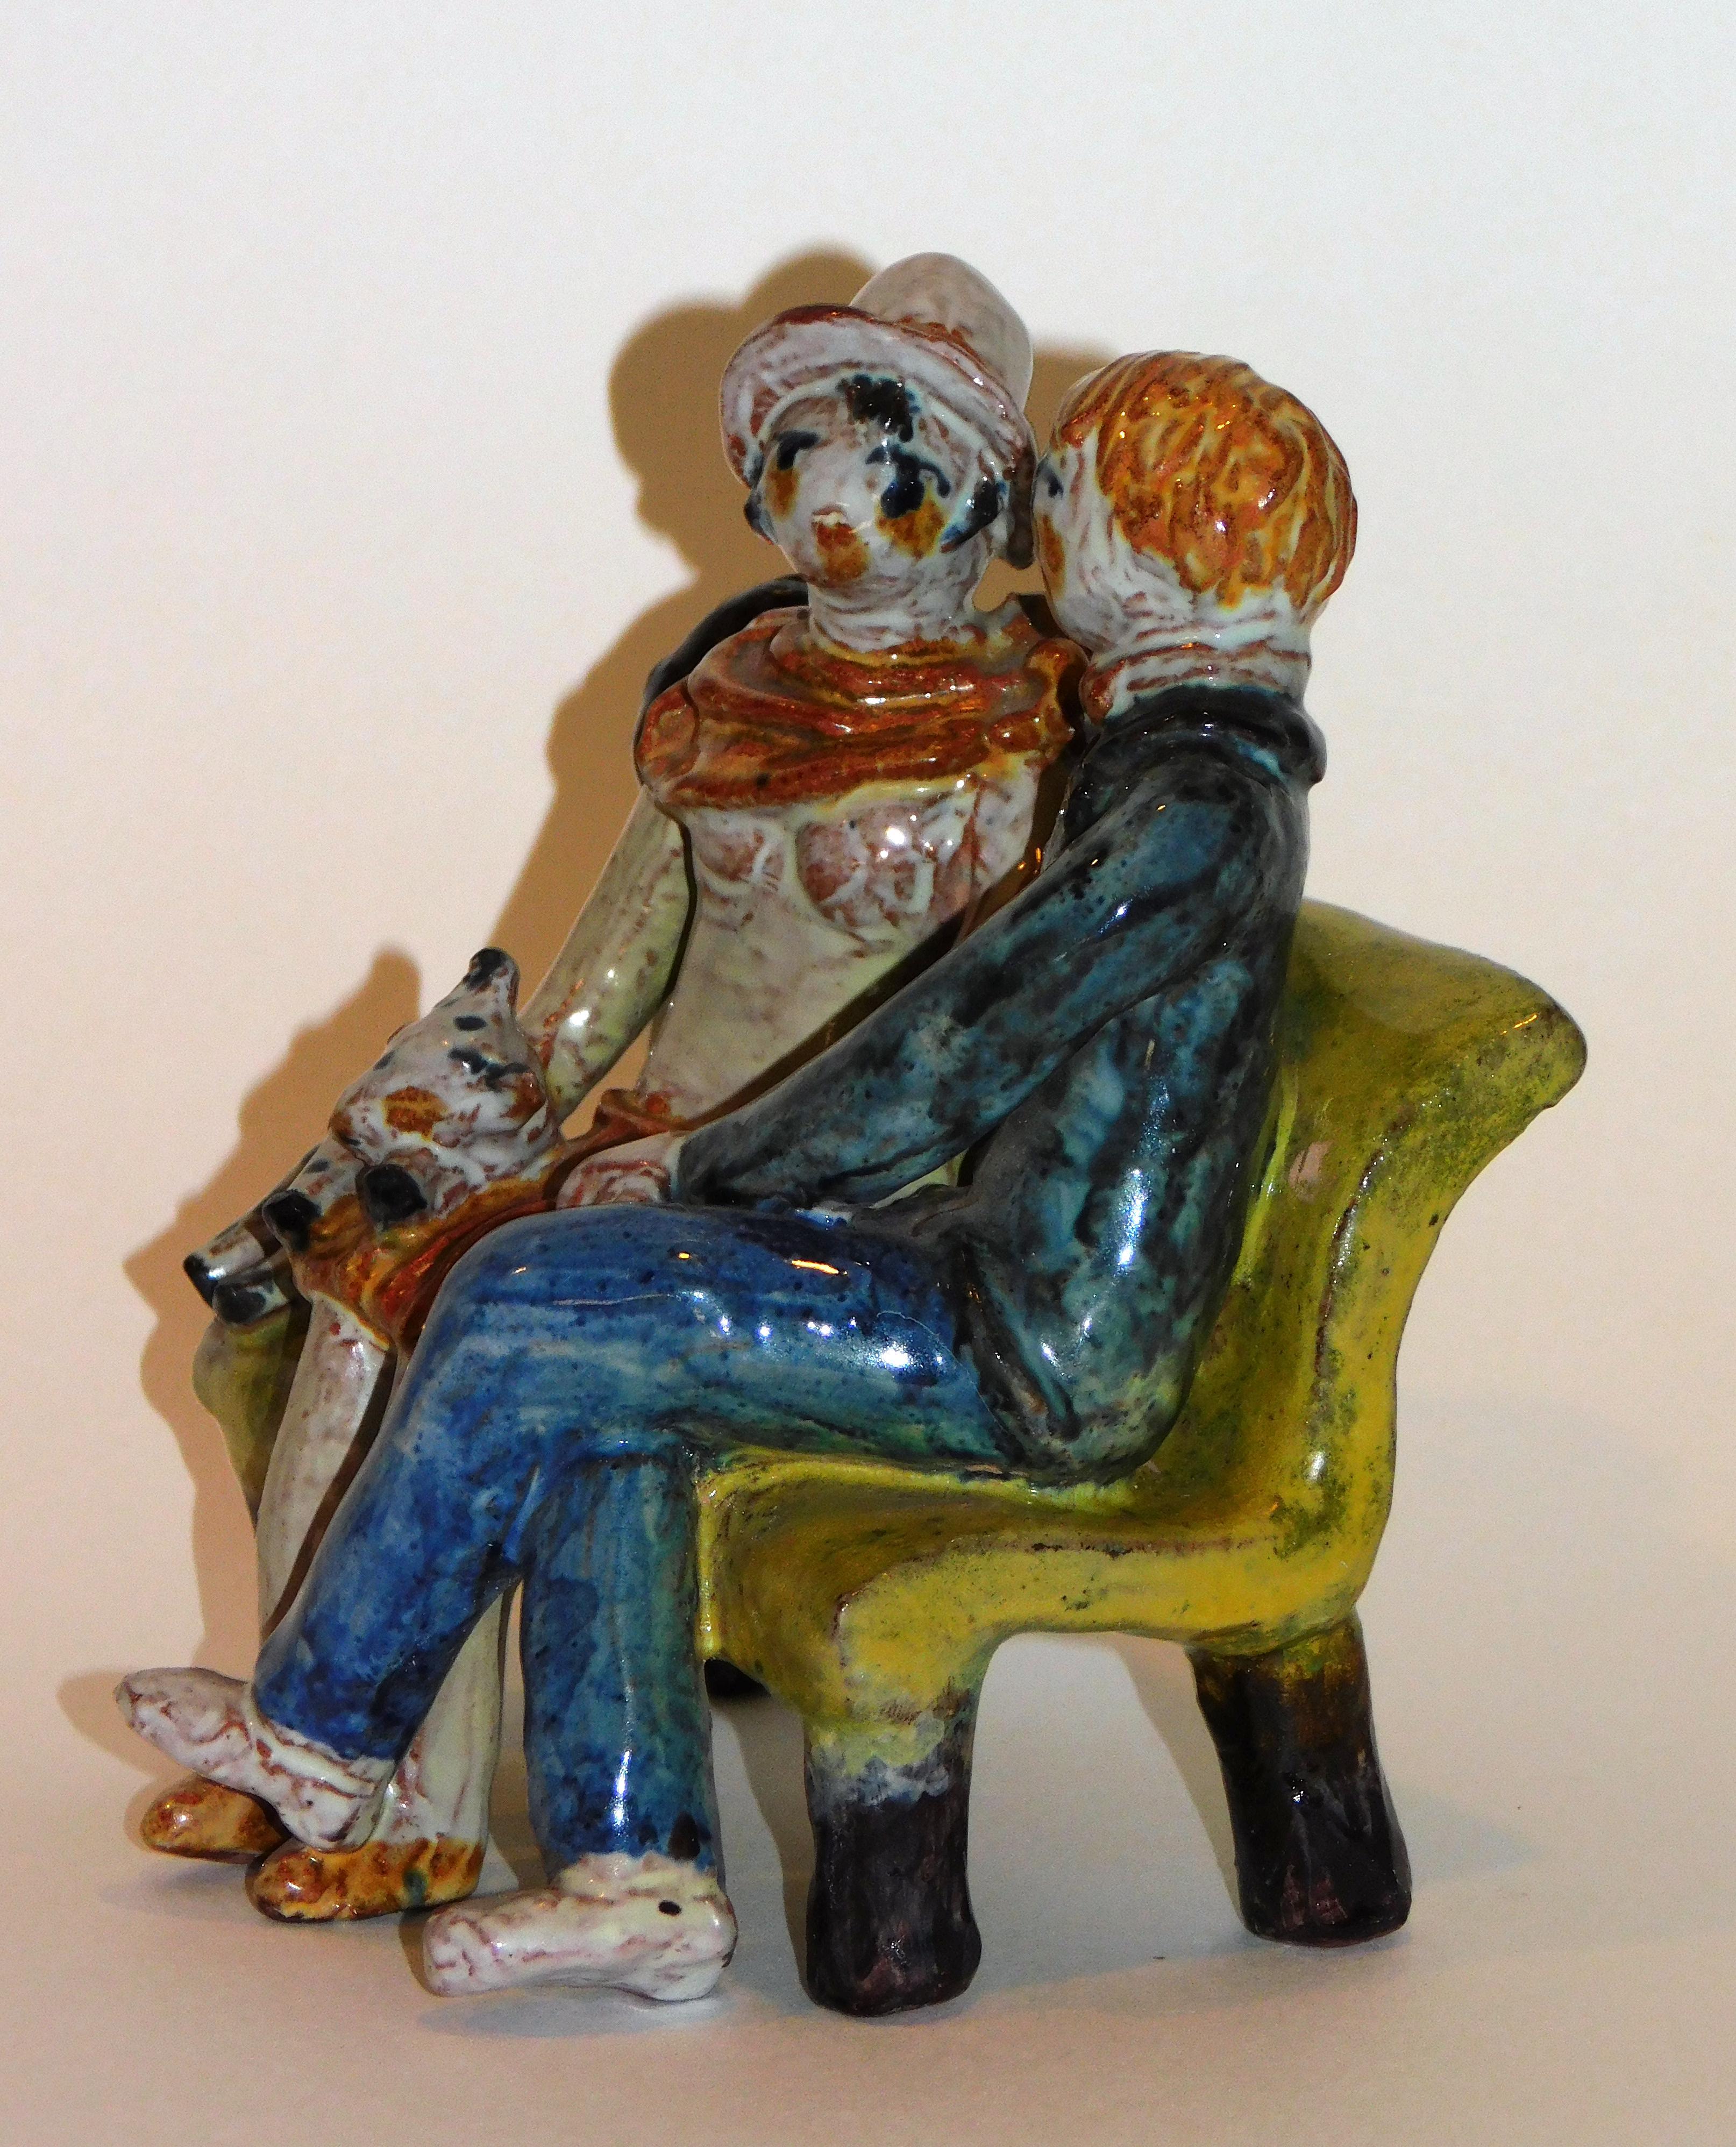 Excellent ceramic designed by well known Wiener Werkstatte artist Kitty Rix. It depicts a young couple on a park bench holding hands.
Executed by the Wiener Werkstatte. The figurine measures 5 1/2